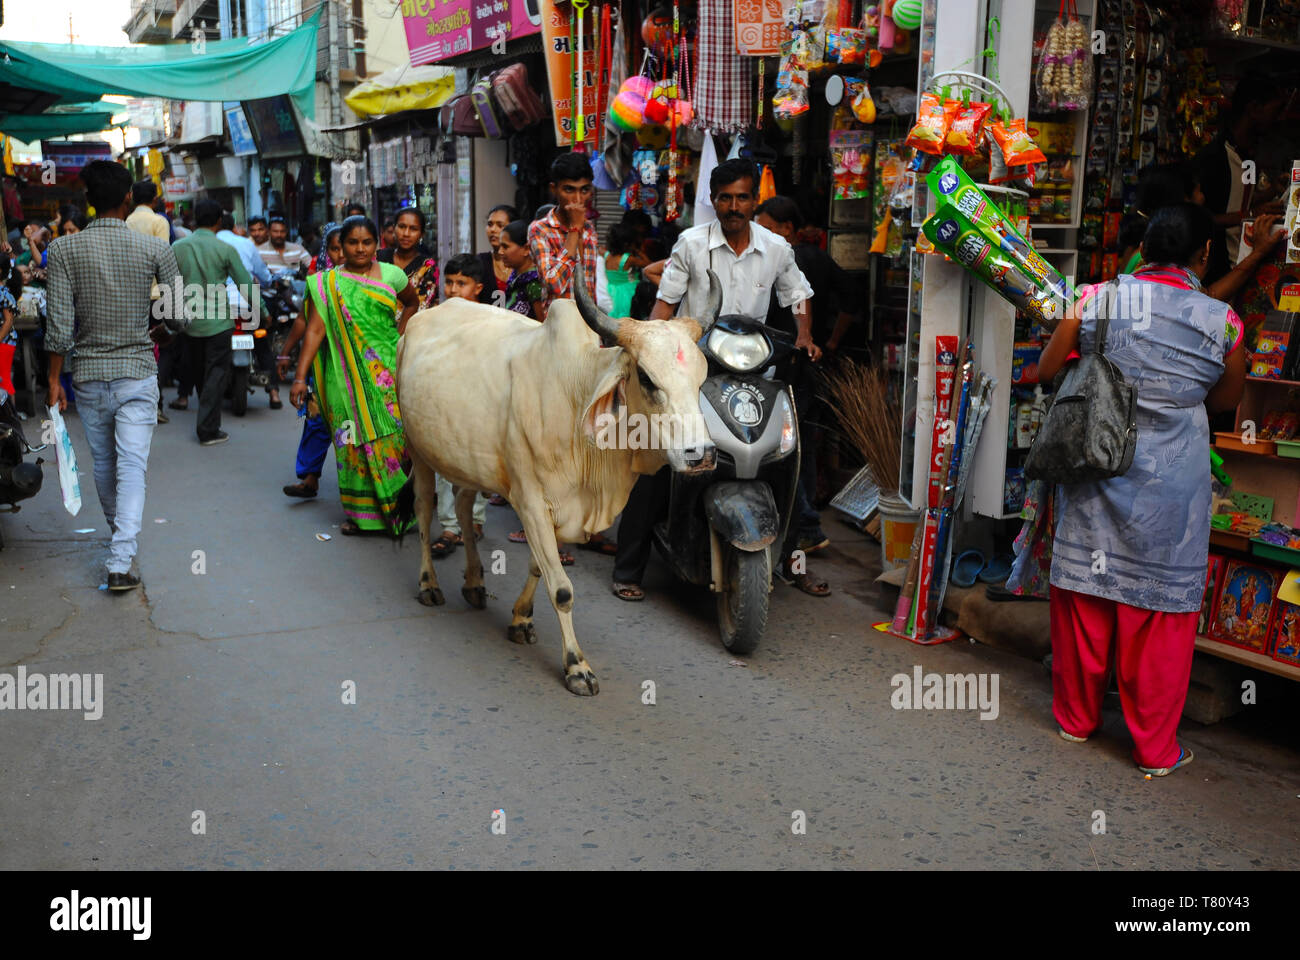 Busy shopping street in the market, with sacred cow, Mandvi, Gujarat, India, Asia Stock Photo